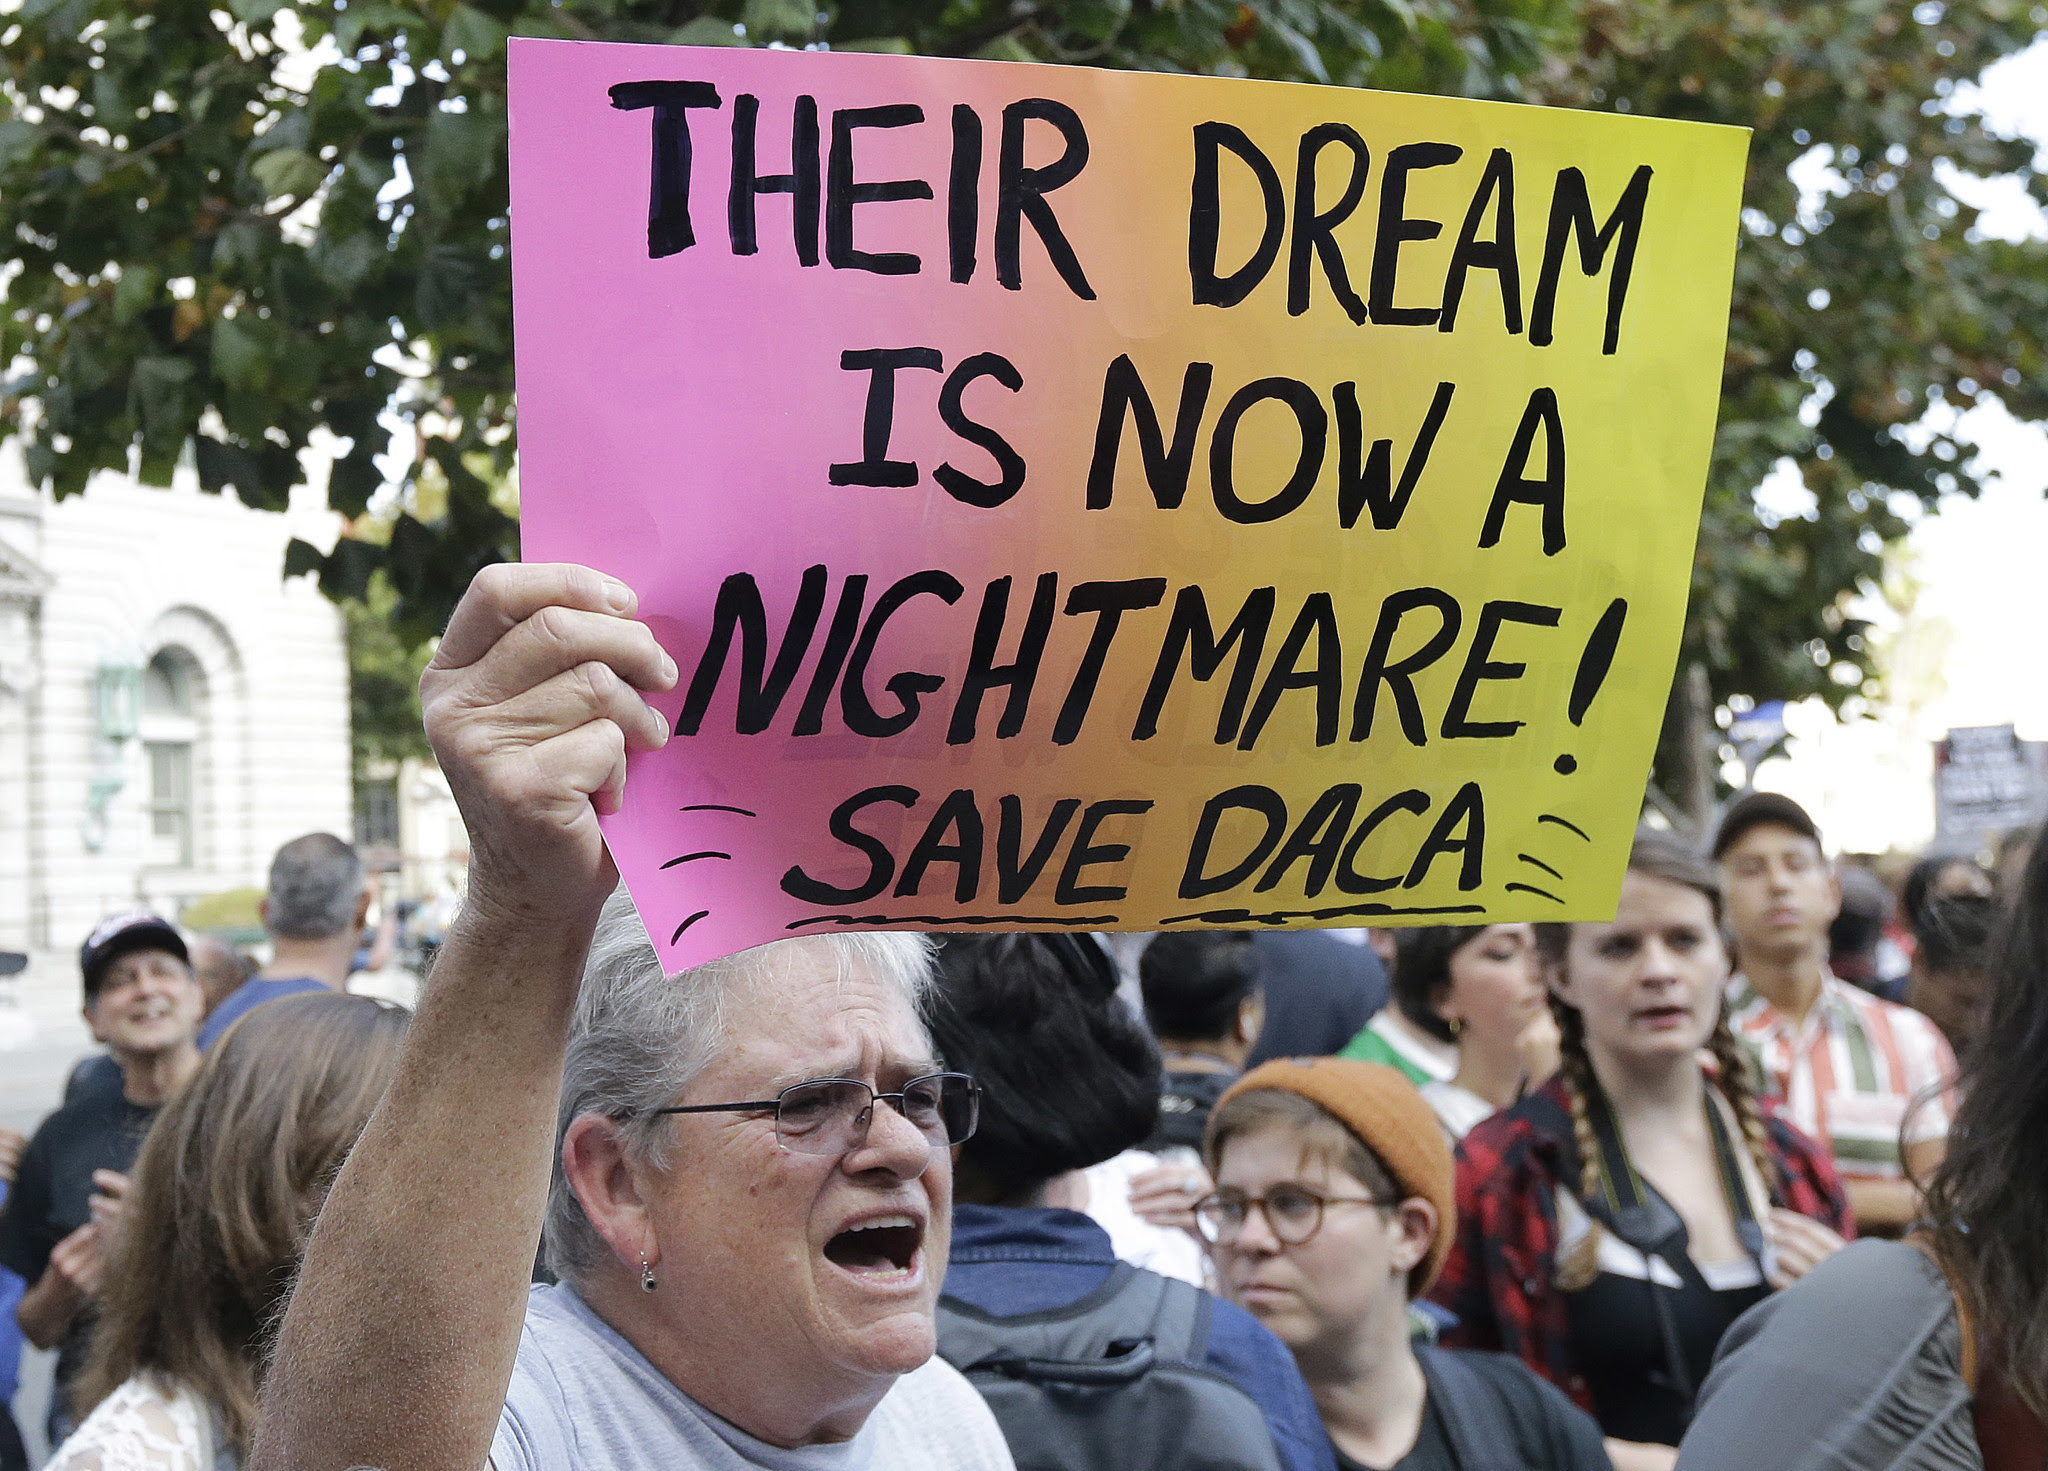 Protect the rights of Dreamers and DACA reipients.